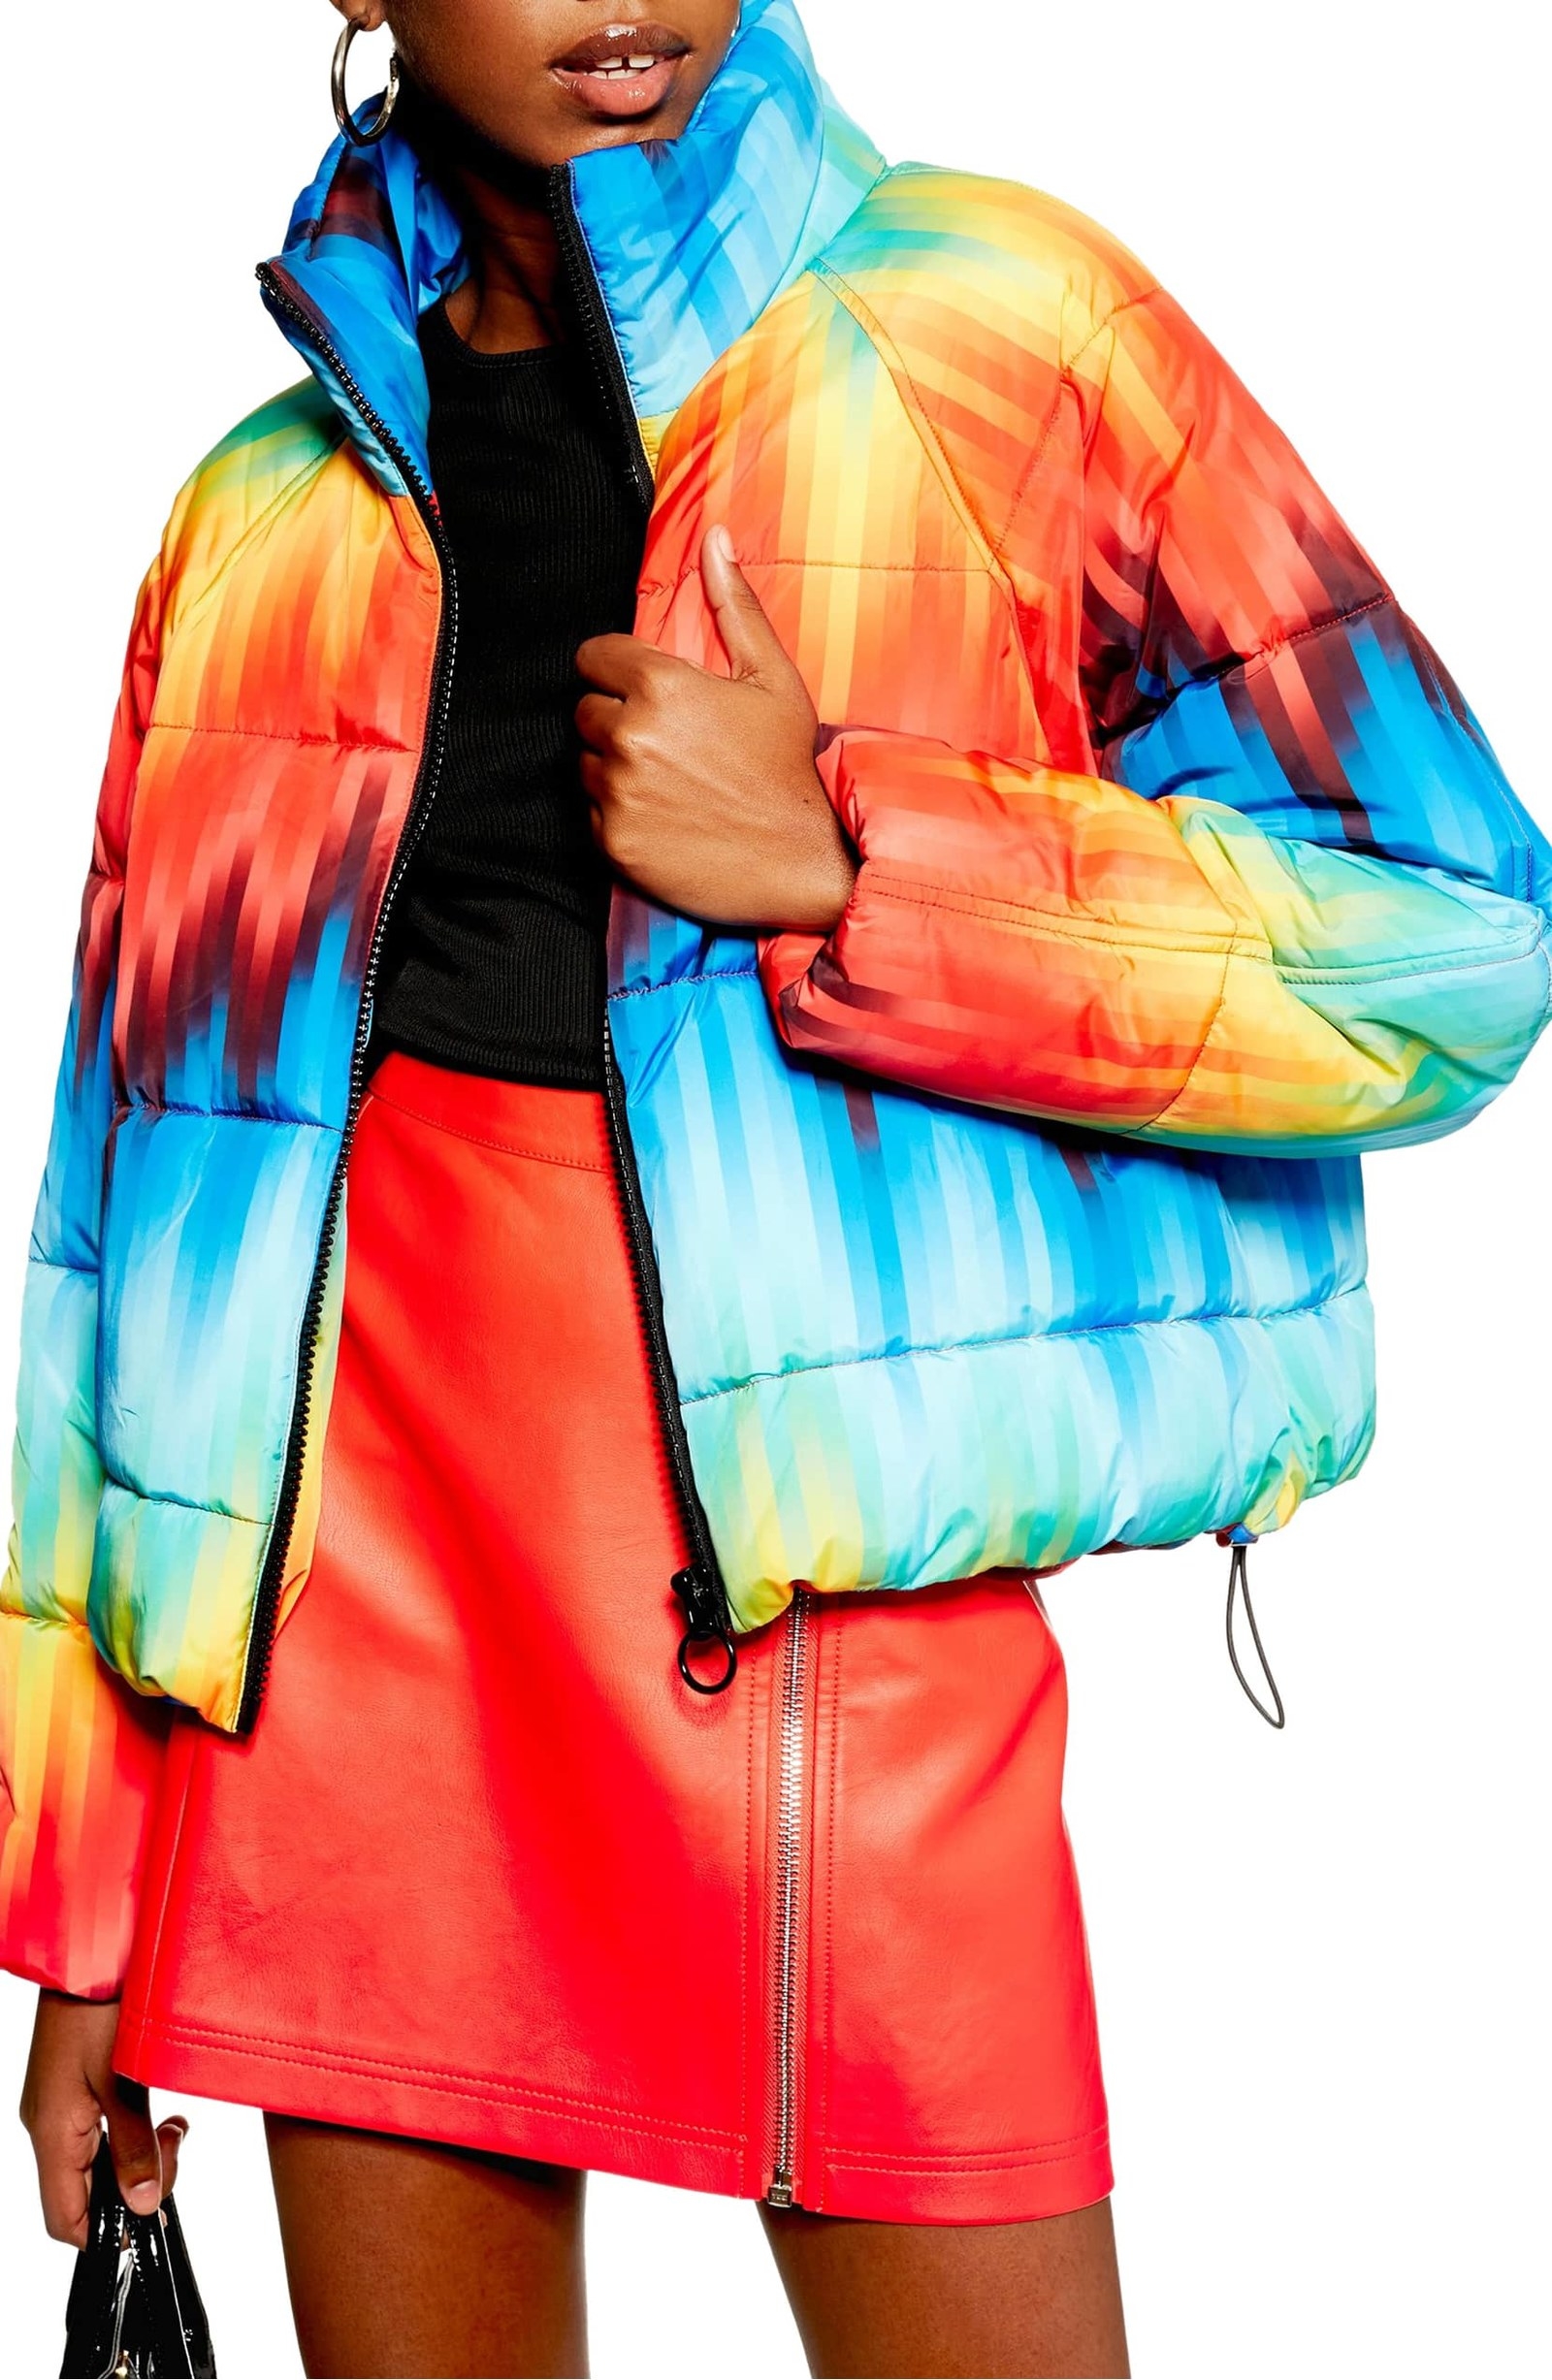 People Are Loving Rapport's Colourful Jacket 